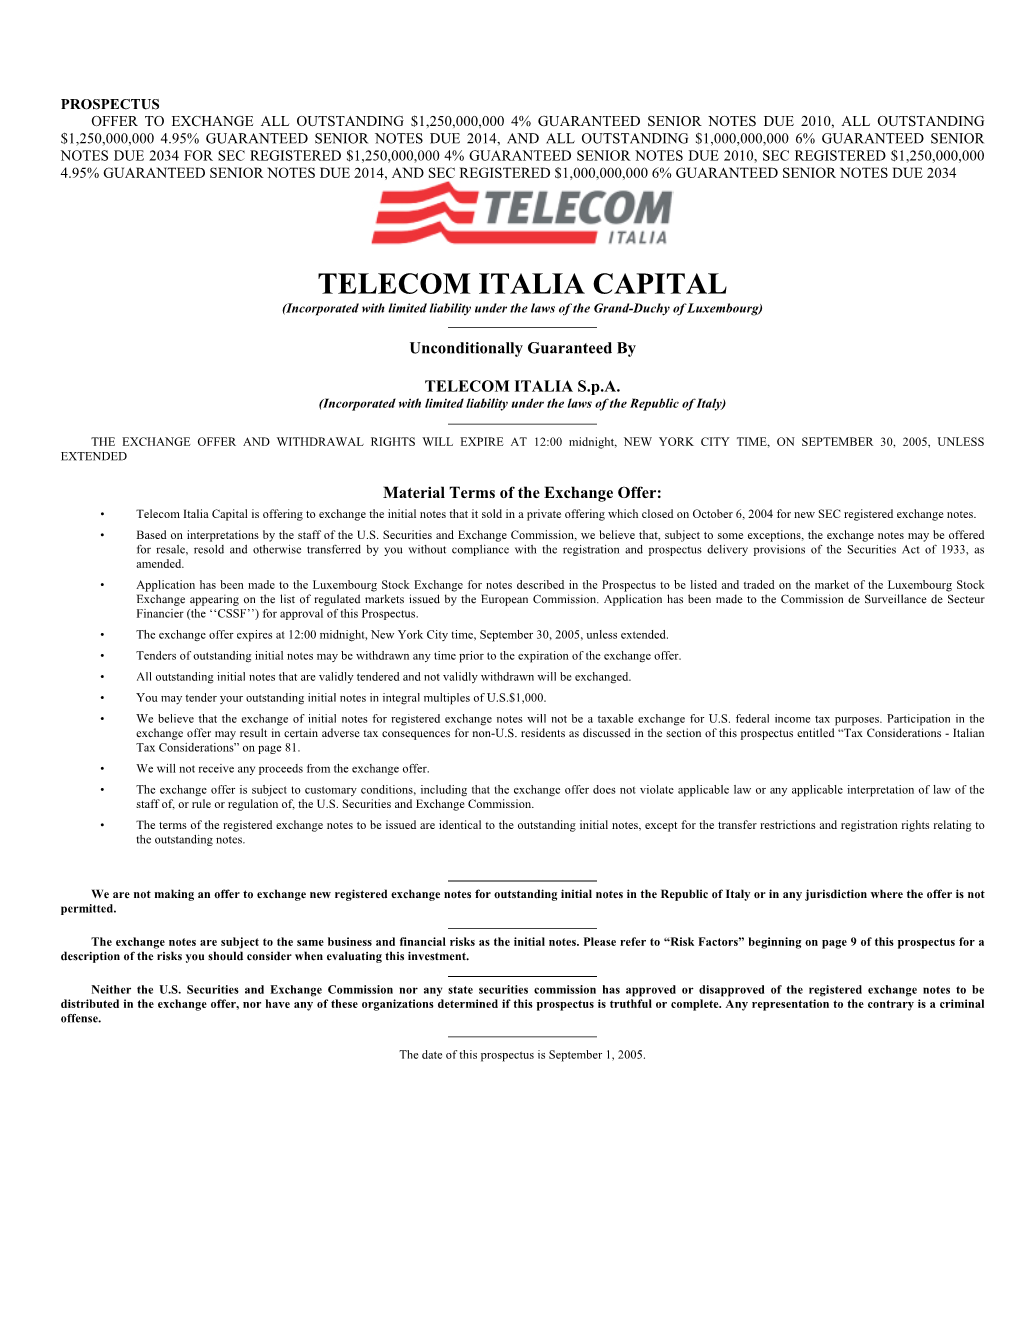 TELECOM ITALIA CAPITAL (Incorporated with Limited Liability Under the Laws of the Grand-Duchy of Luxembourg)